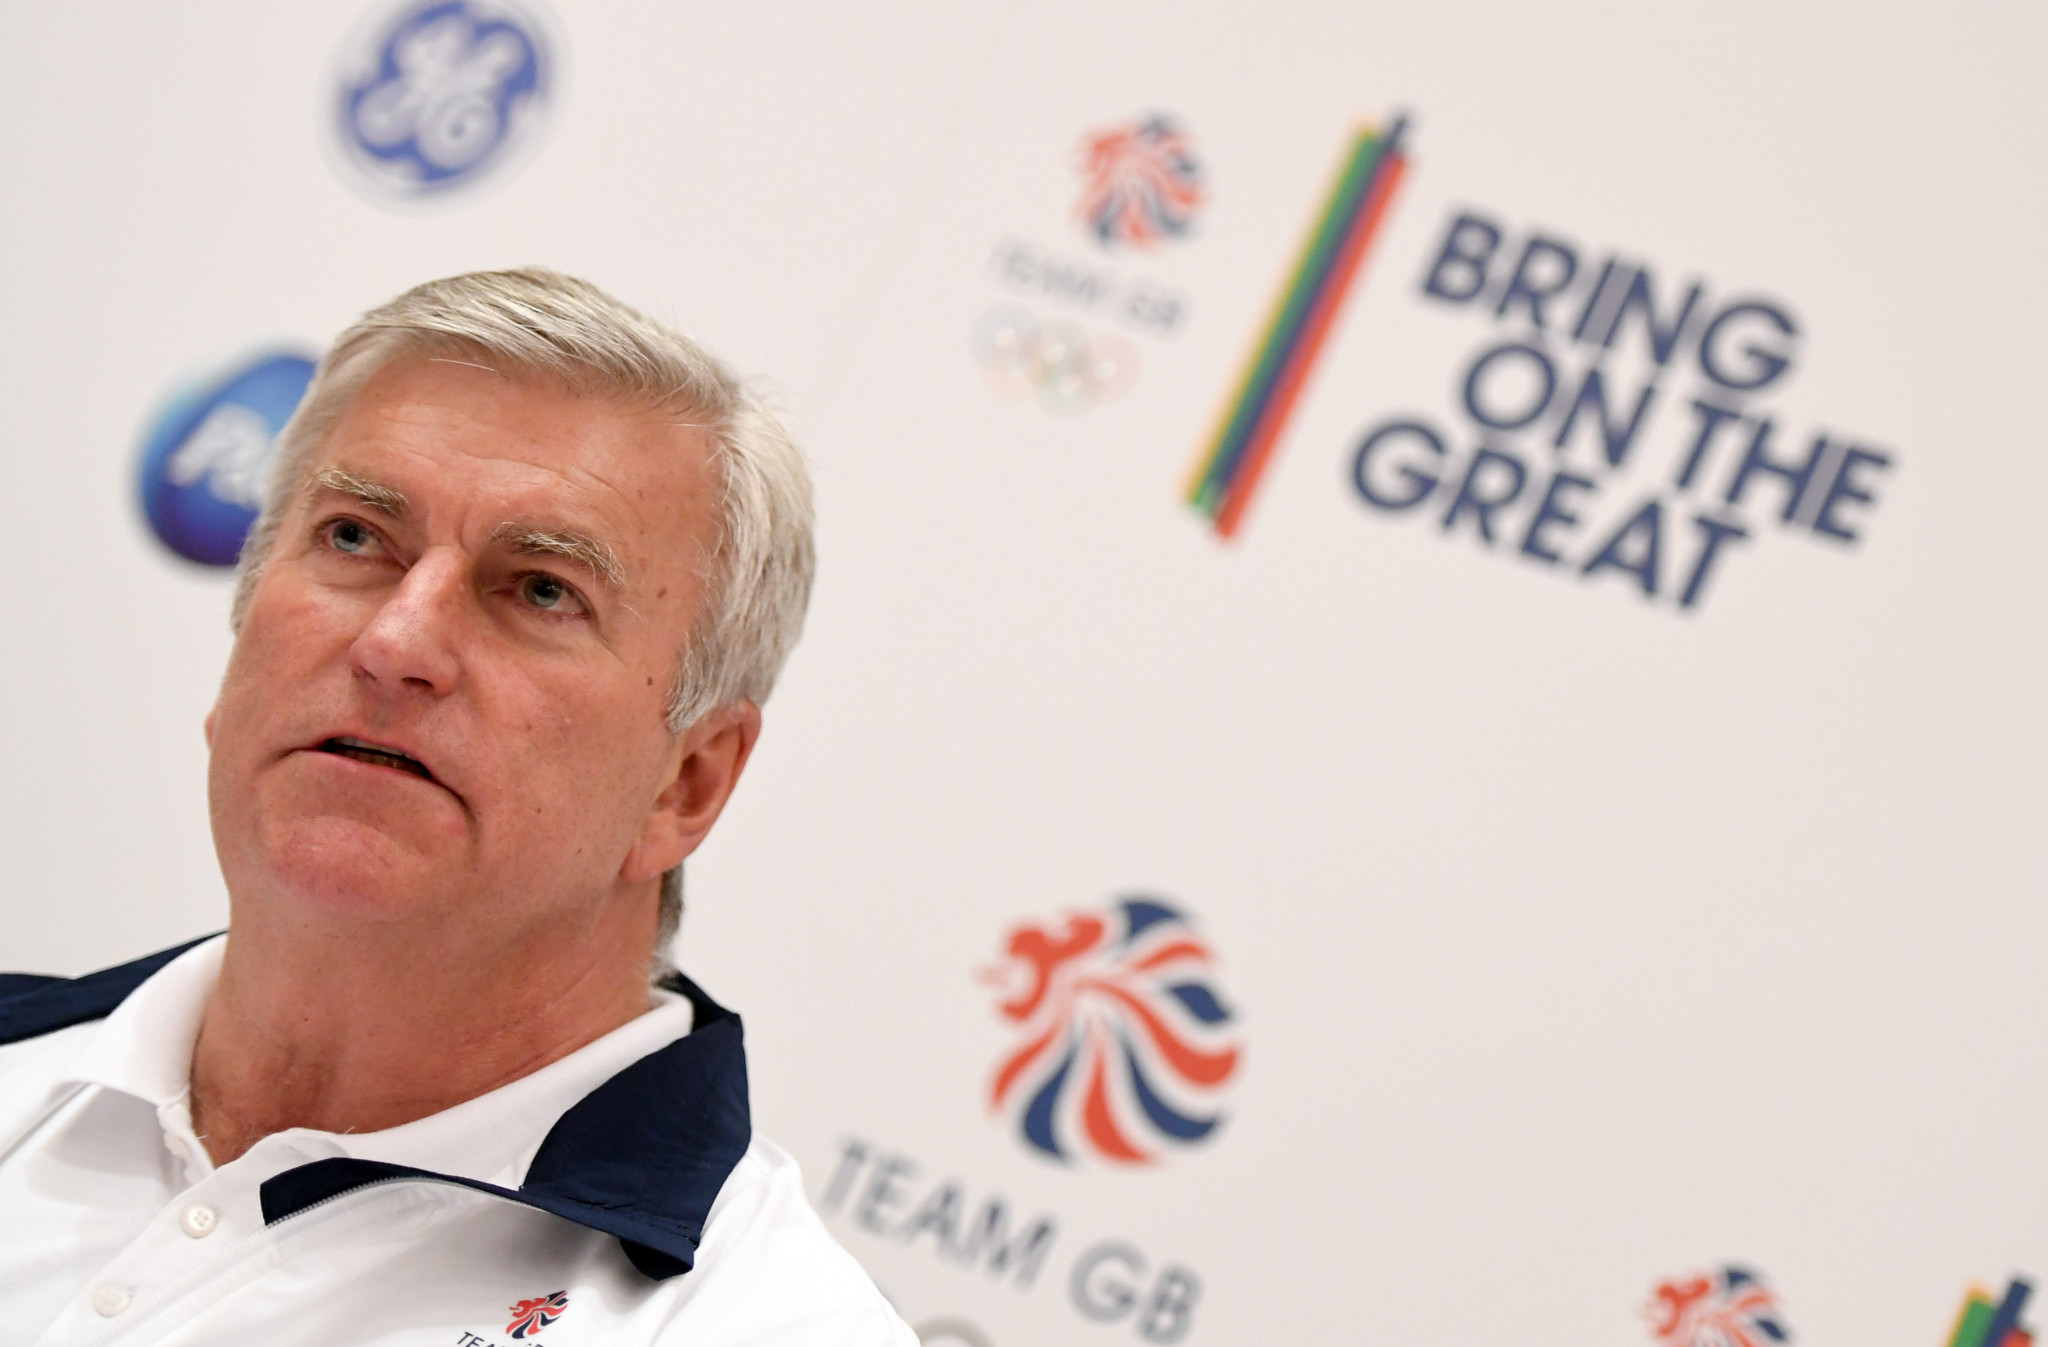 BOA chief executive Bill Sweeney spoke after similar comments from counterparts at the USOC and COC ©Getty Images